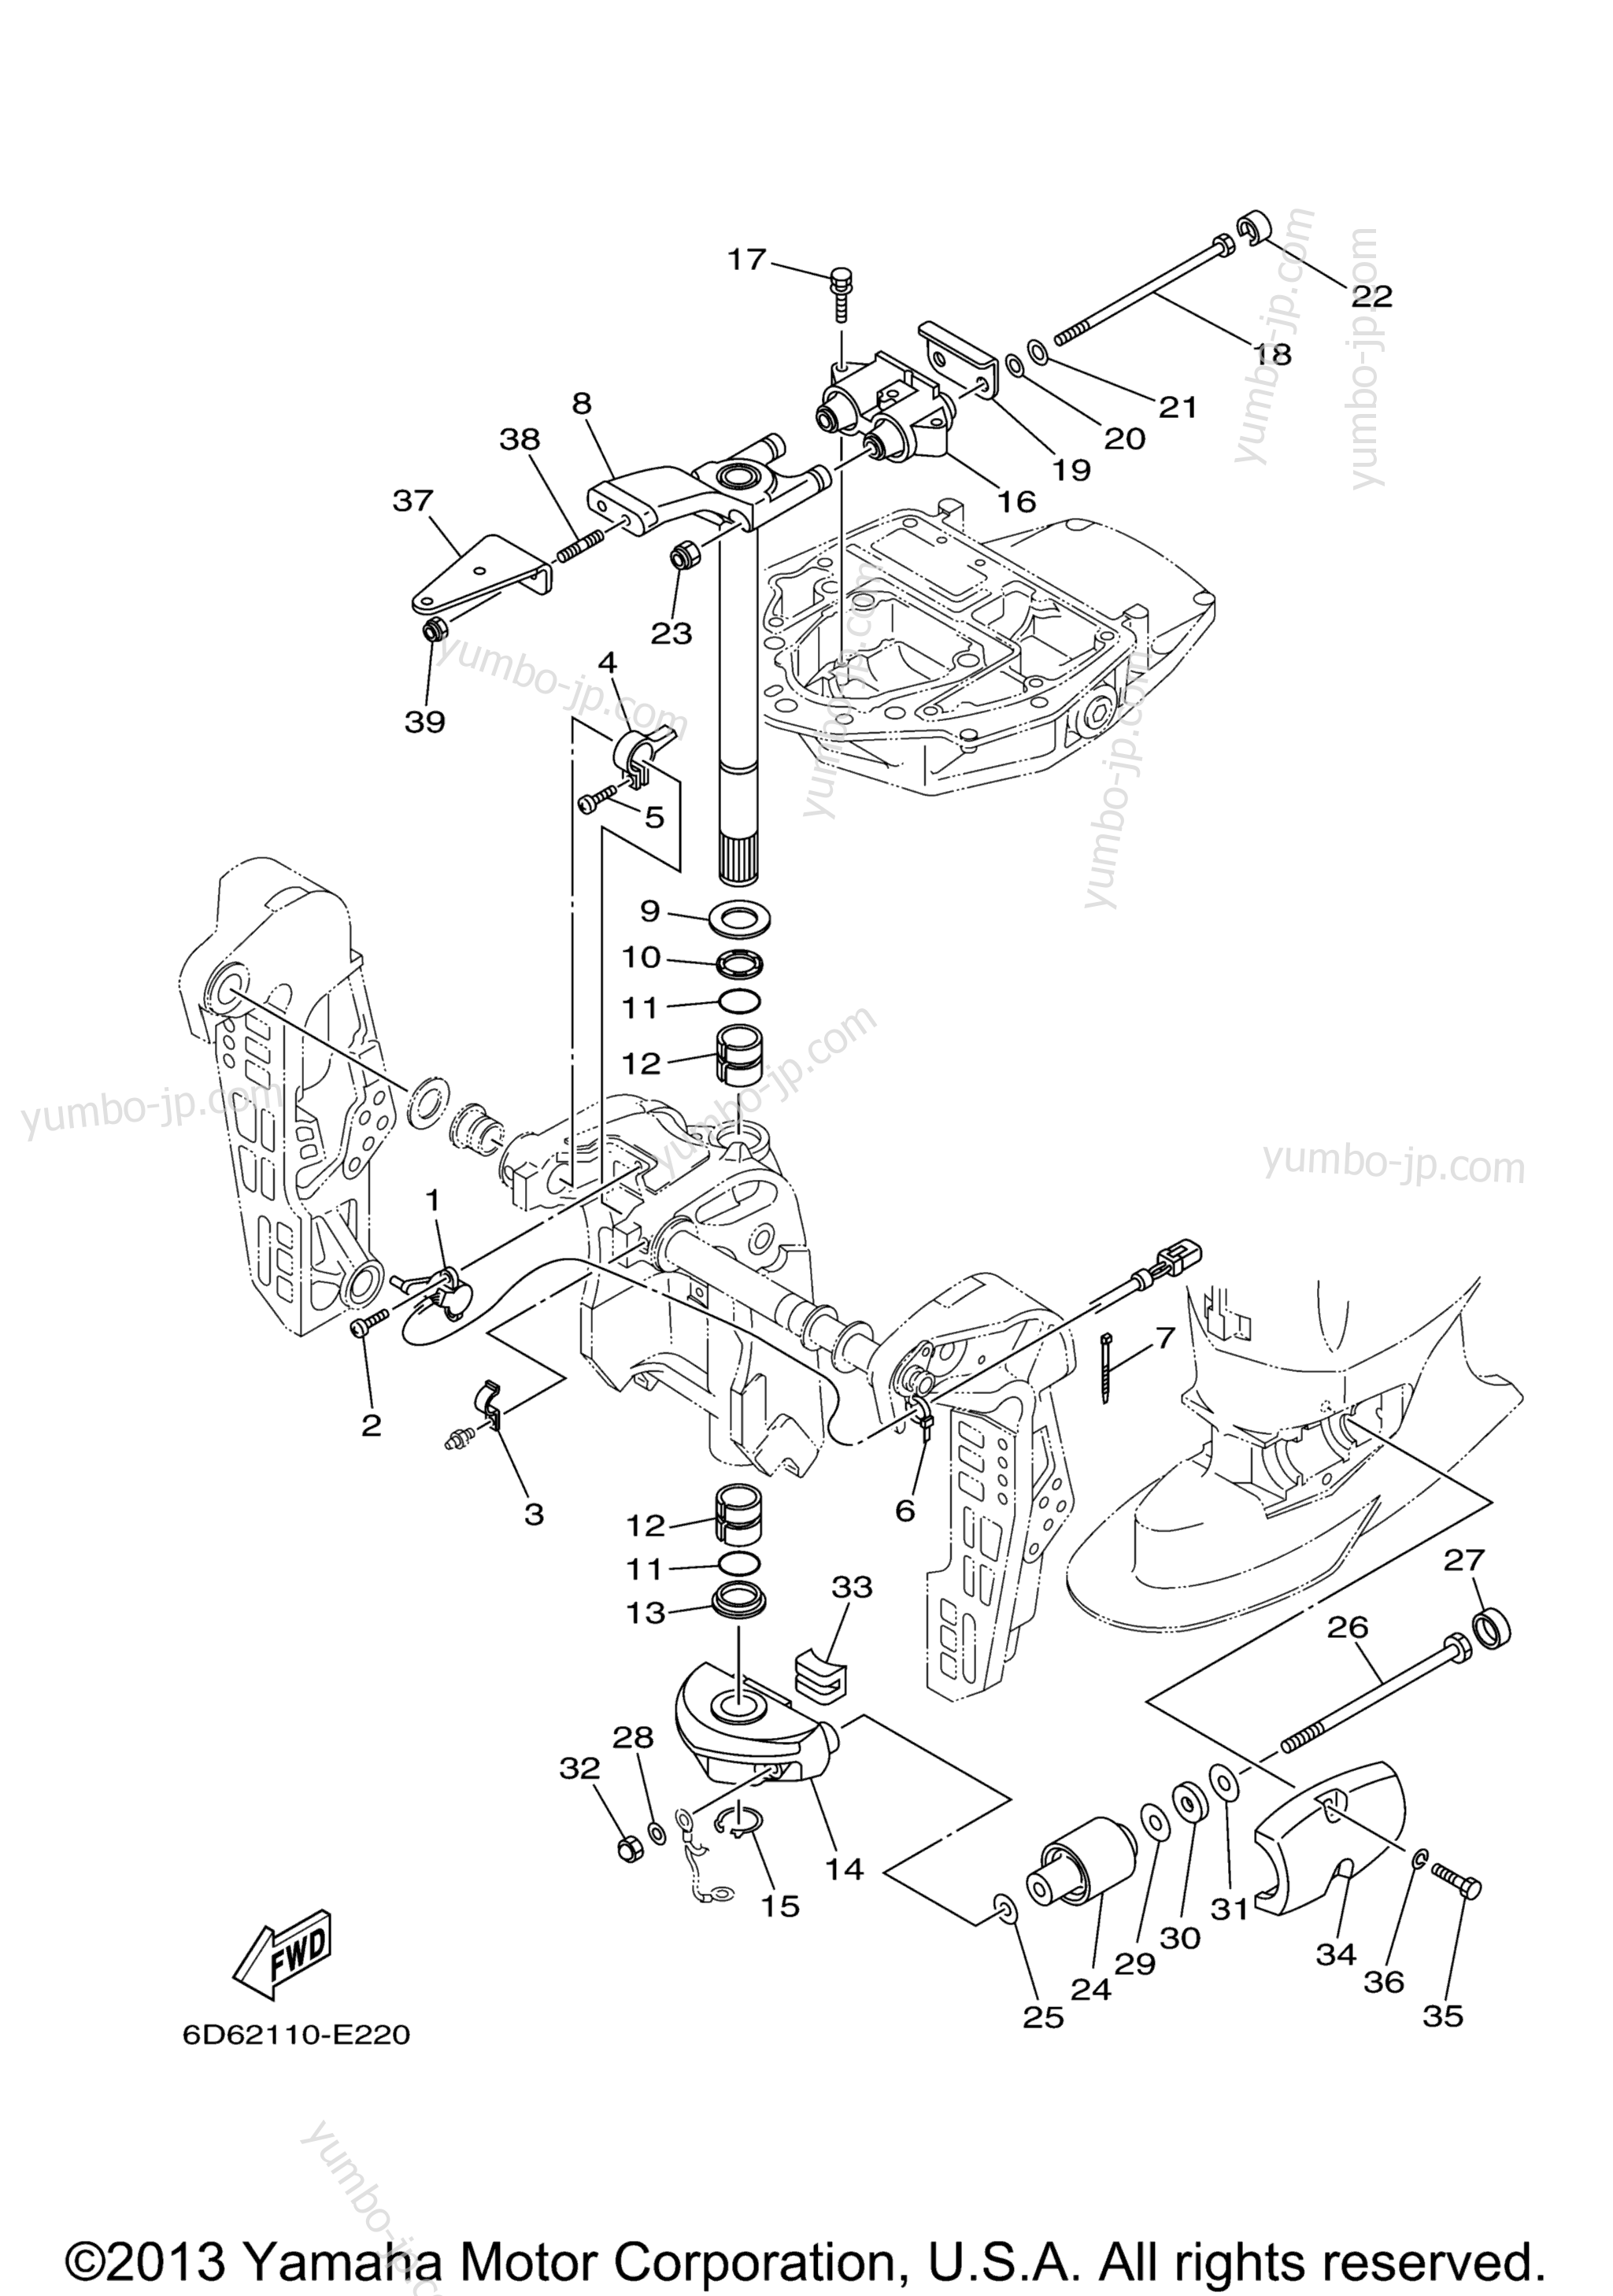 Bracket 2 for outboards YAMAHA F90TLR (0405) 62P-1005583~1008068 F90TLR_TXR_TJR 61P-1013277~102 2006 year